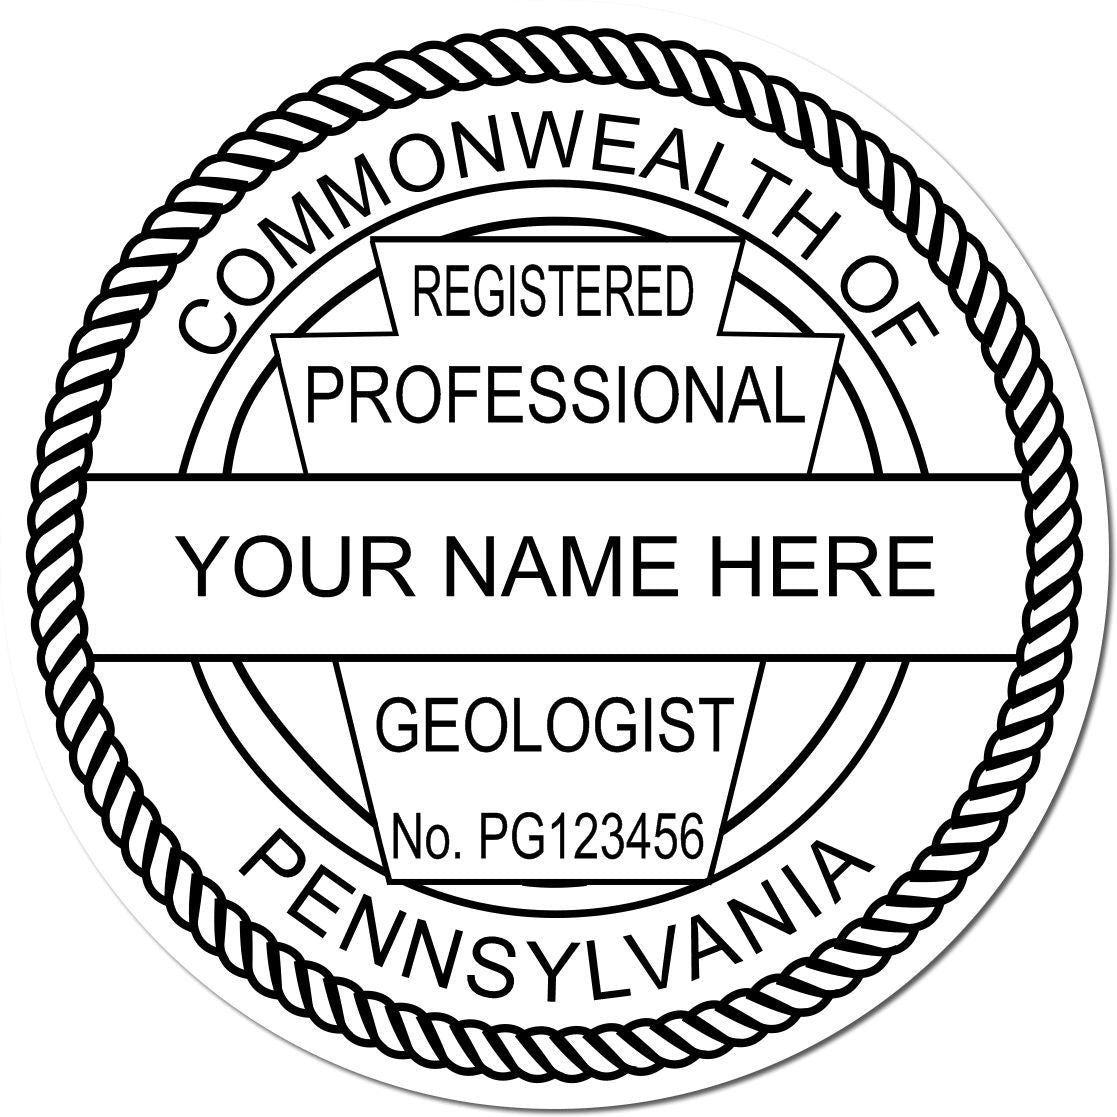 This paper is stamped with a sample imprint of the Digital Pennsylvania Geologist Stamp, Electronic Seal for Pennsylvania Geologist, signifying its quality and reliability.